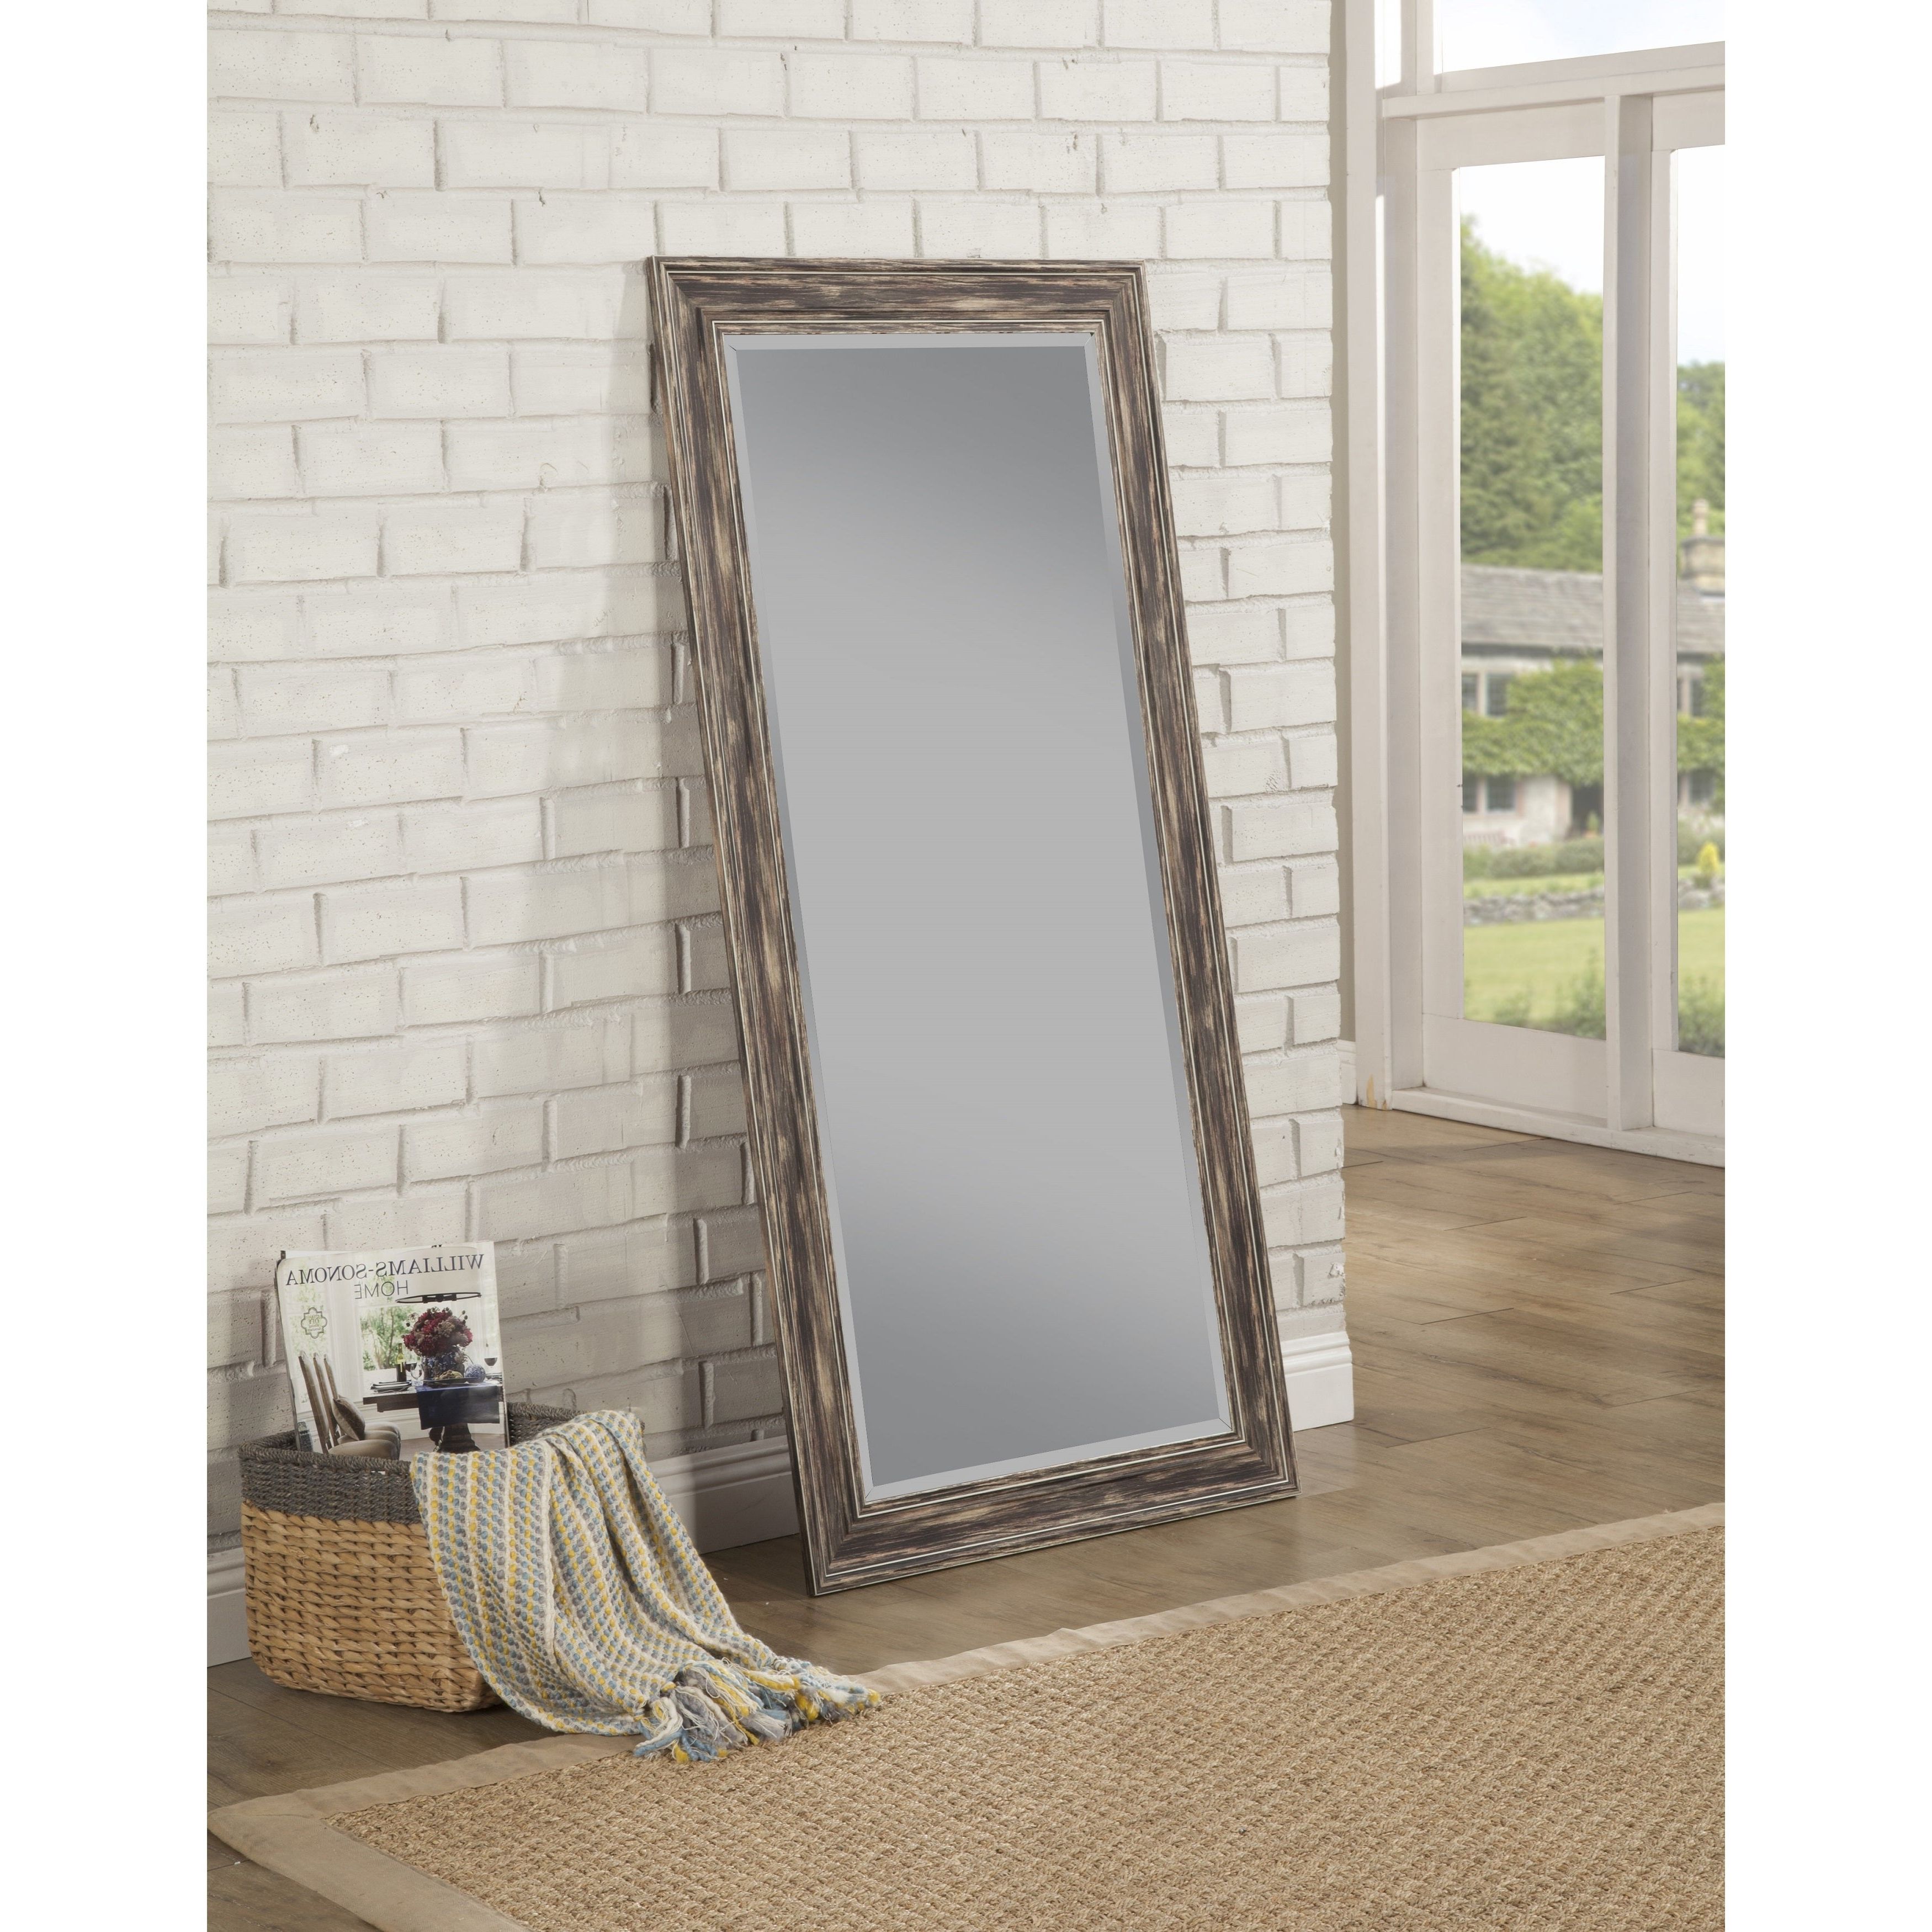 Sandberg Furniture Antique Black Farmhouse Full Length Leaner Mirror –  Antique Black – A/n With Regard To 2020 Handcrafted Farmhouse Full Length Mirrors (View 6 of 20)